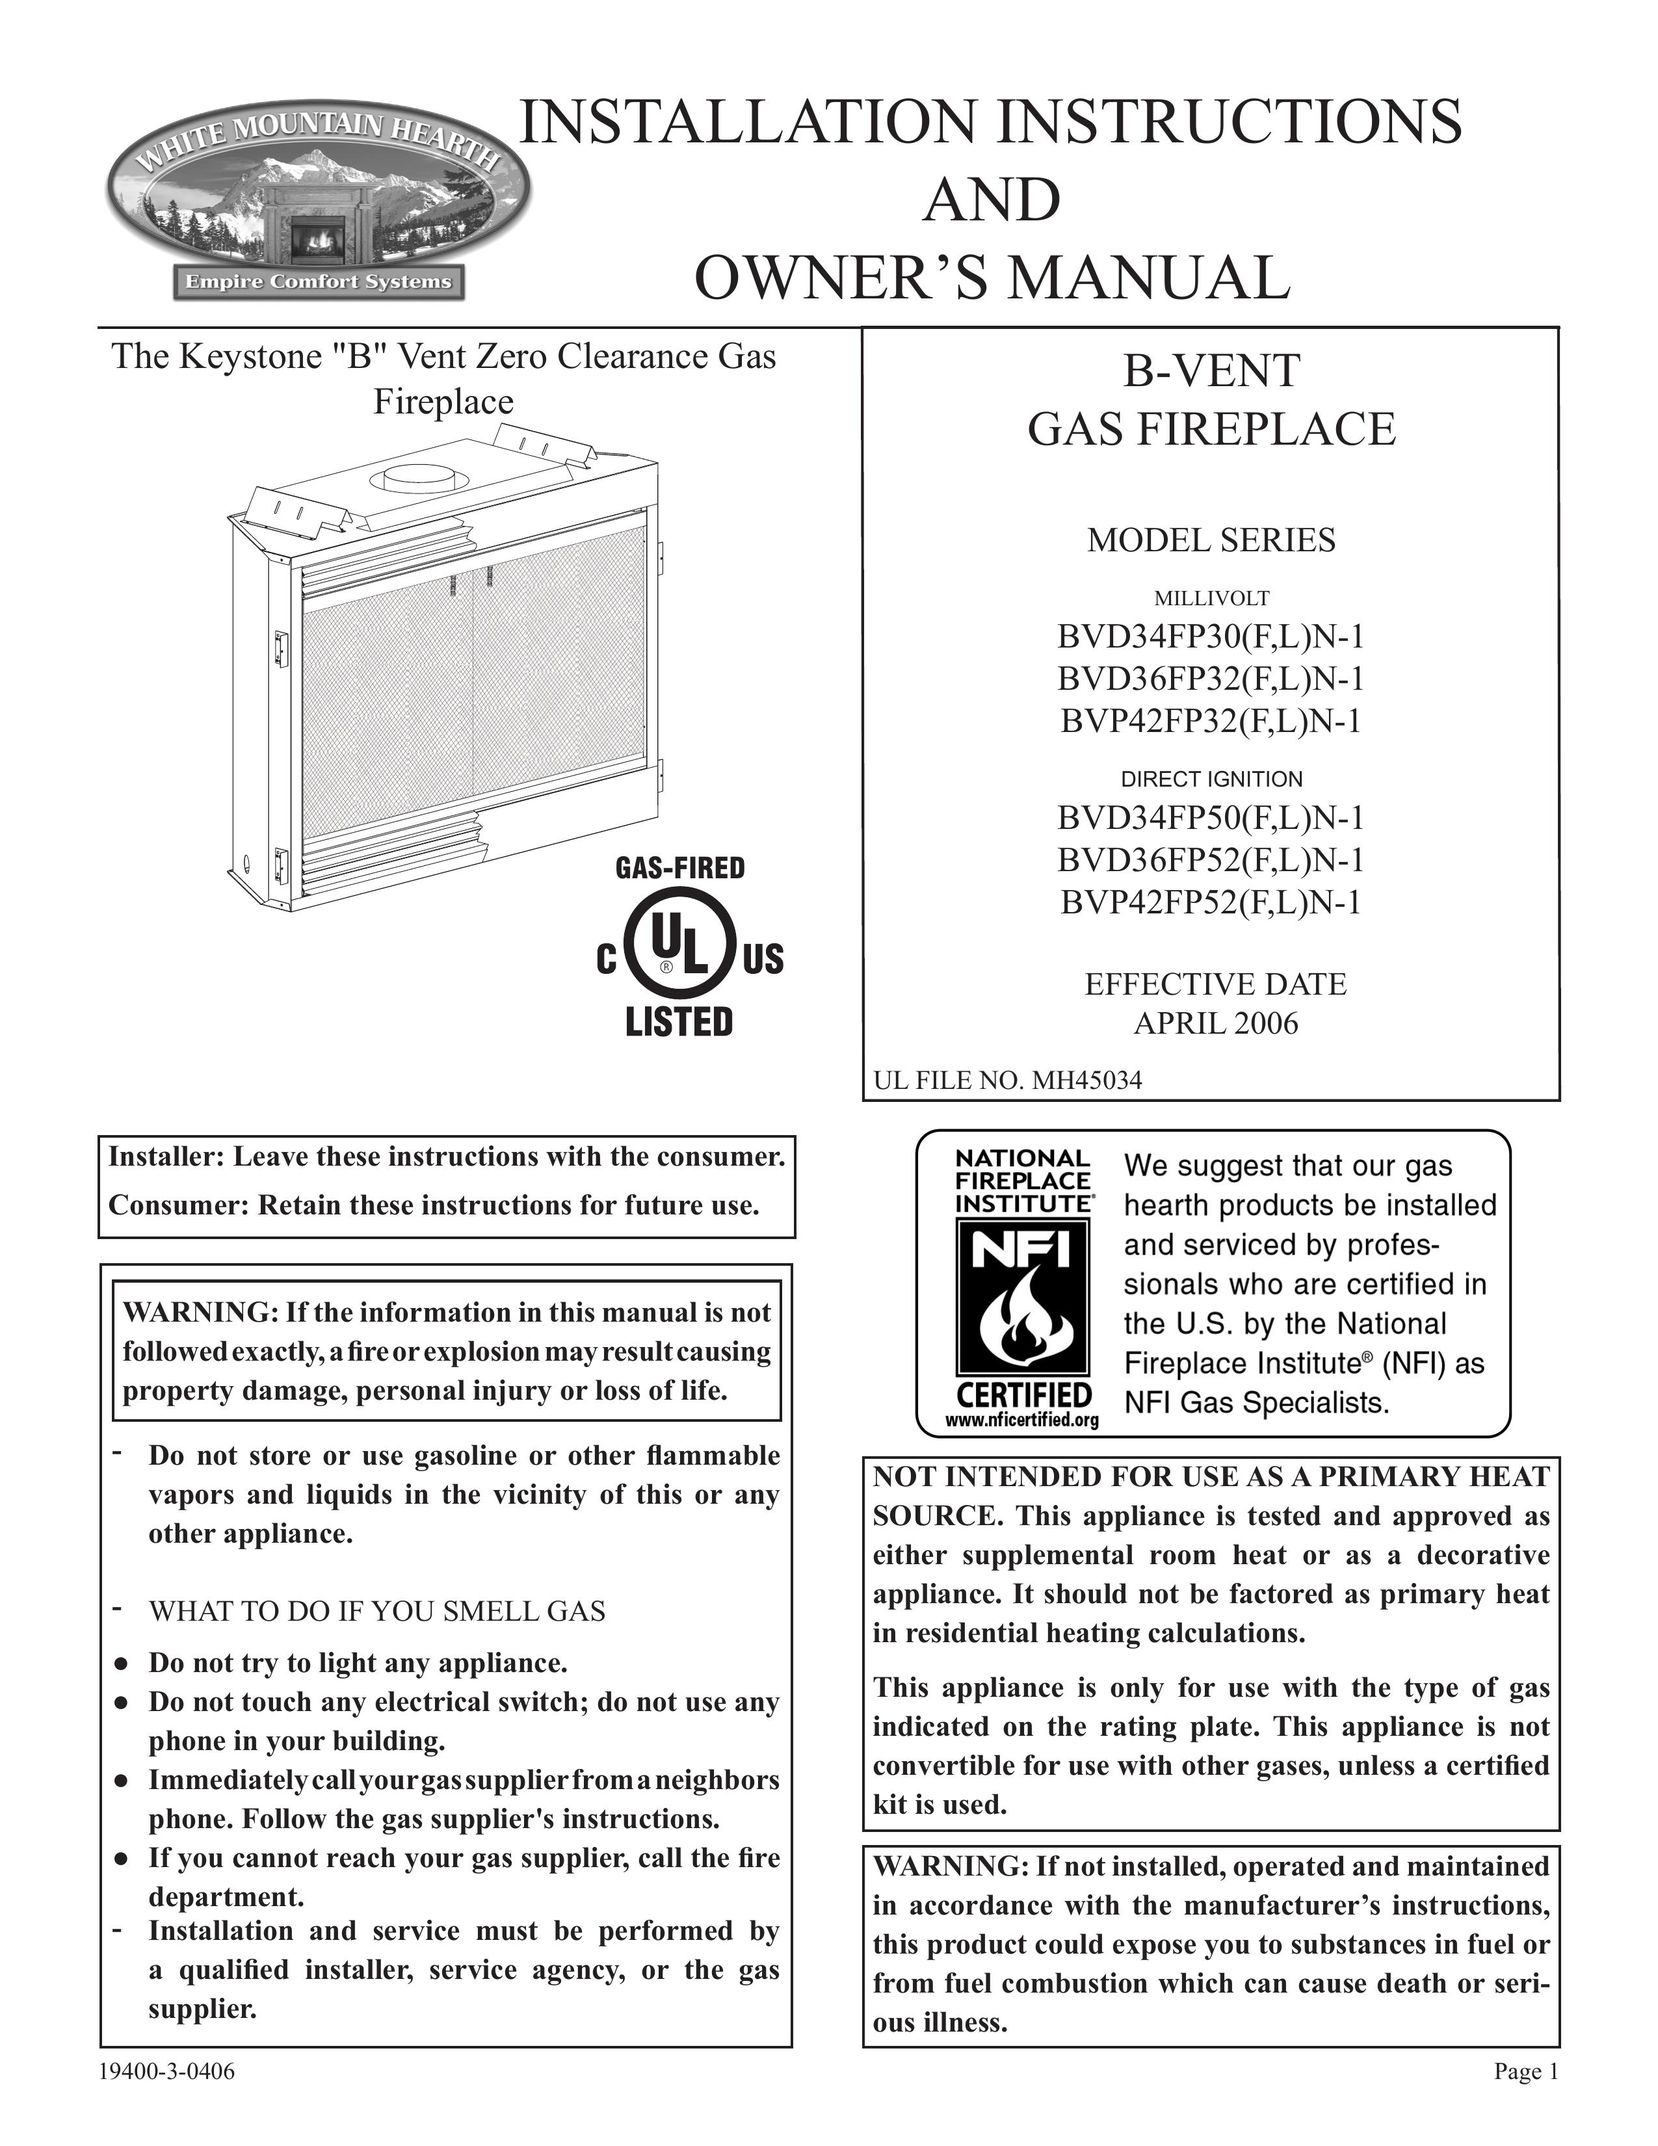 Empire Comfort Systems BVD34FP30 Indoor Fireplace User Manual